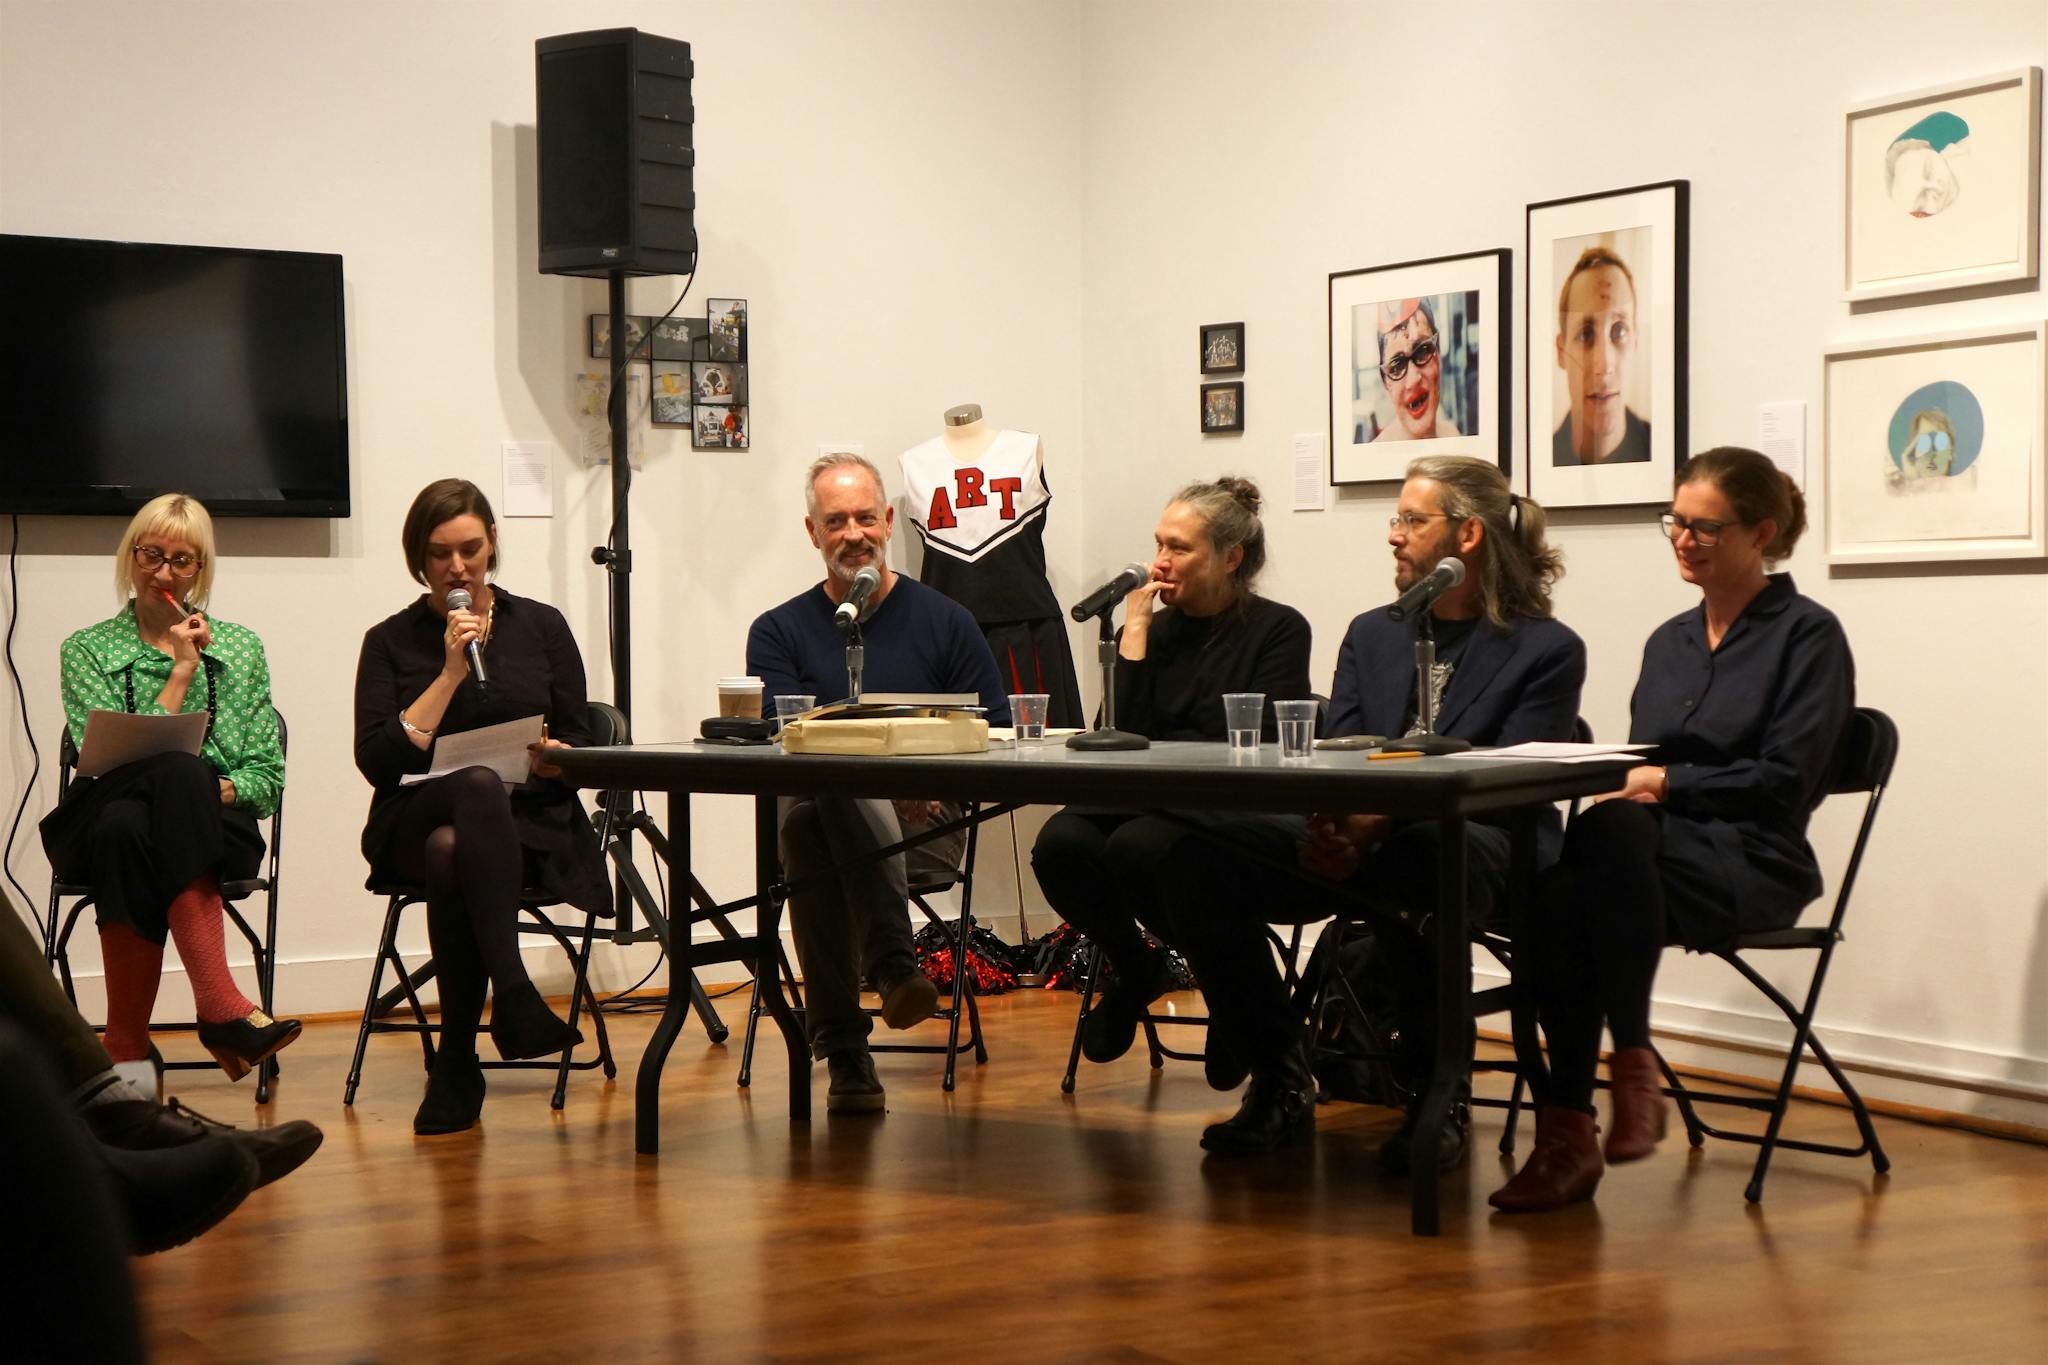 Panelists sit around a table, speaking into microphones, while artworks appear on the walls behind.